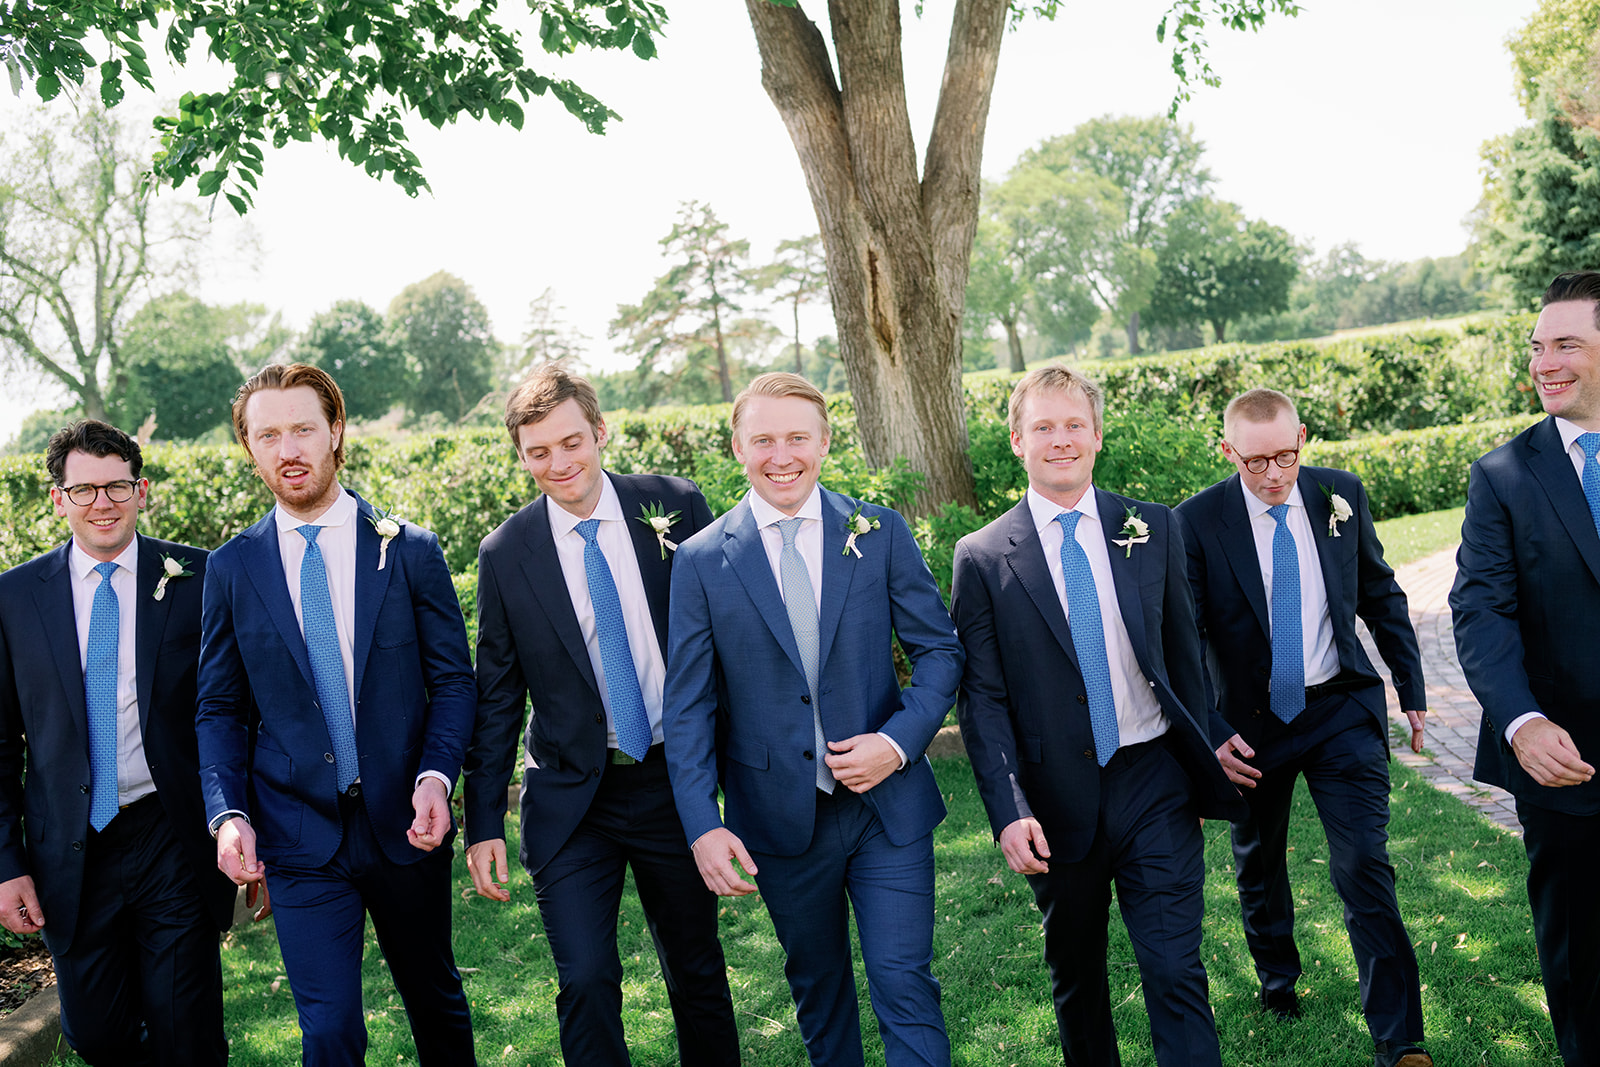 Todd and six groomsmen in navy blue suits and ties walking toward the camera.